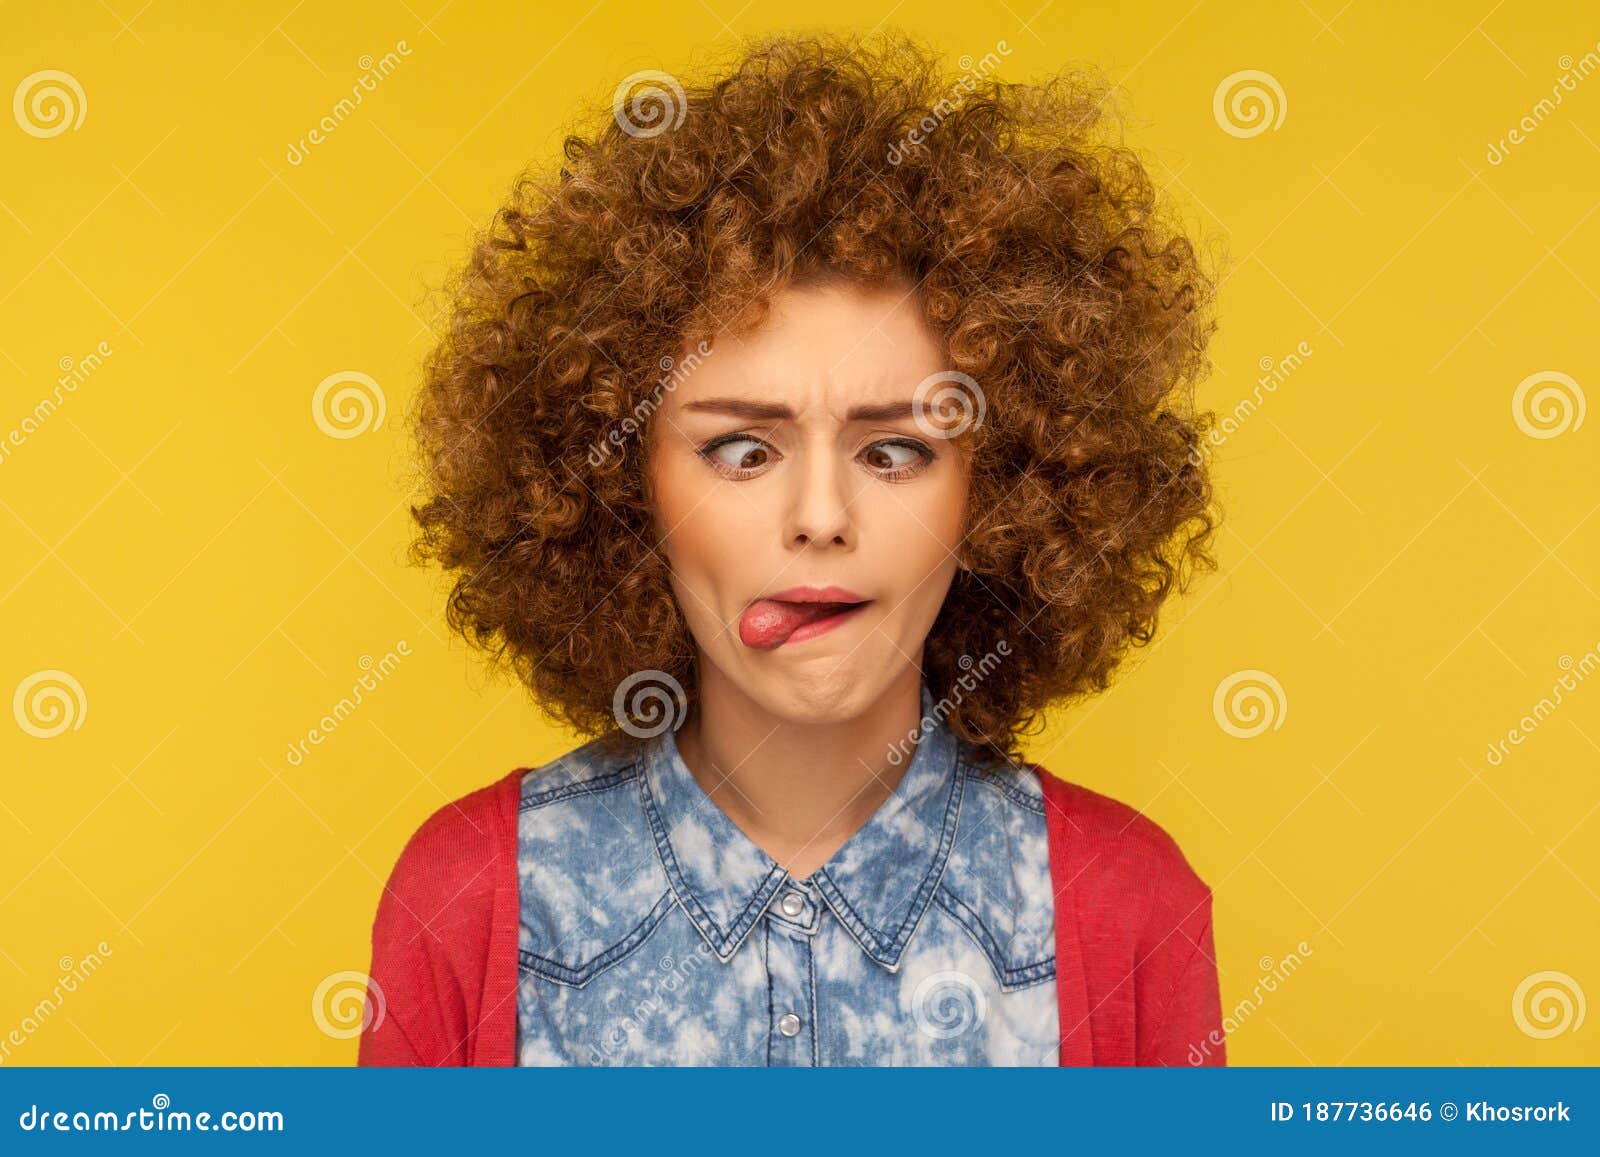 Closeup Portrait of Crazy Woman with Fluffy Curly Hair Demonstrating Tongue  Out and Making Silly Face with Crossed Eyes Stock Photo - Image of funny,  girl: 187736646